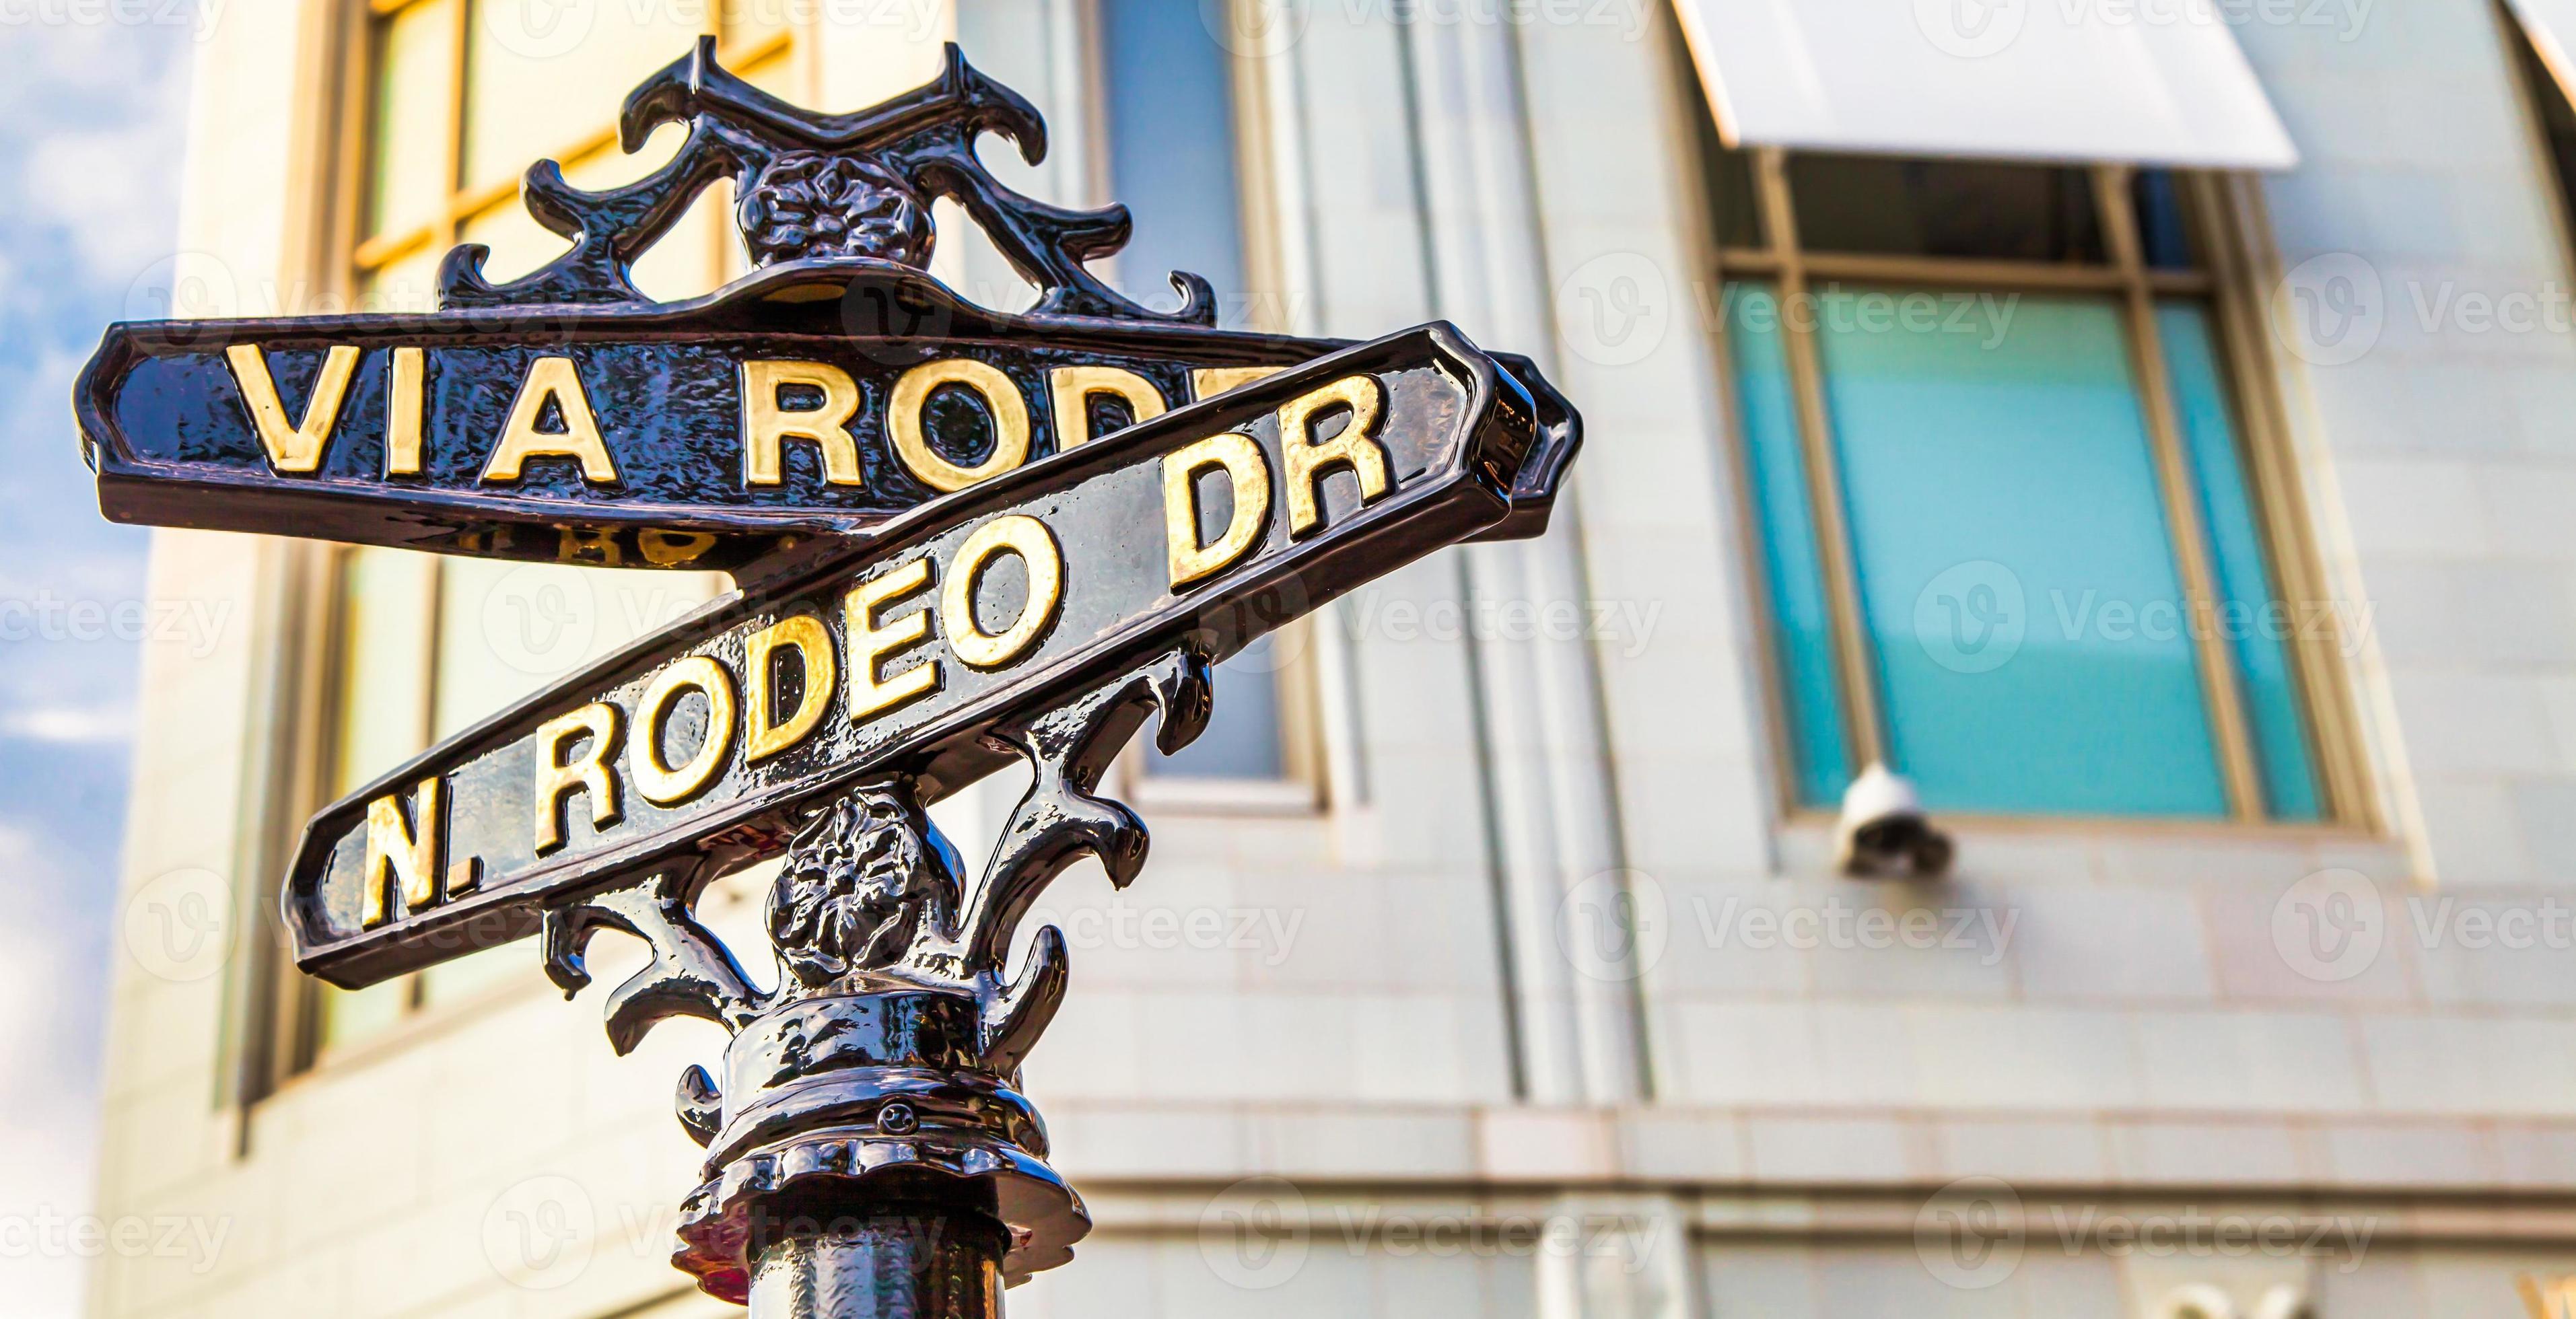 rodeo drive sign